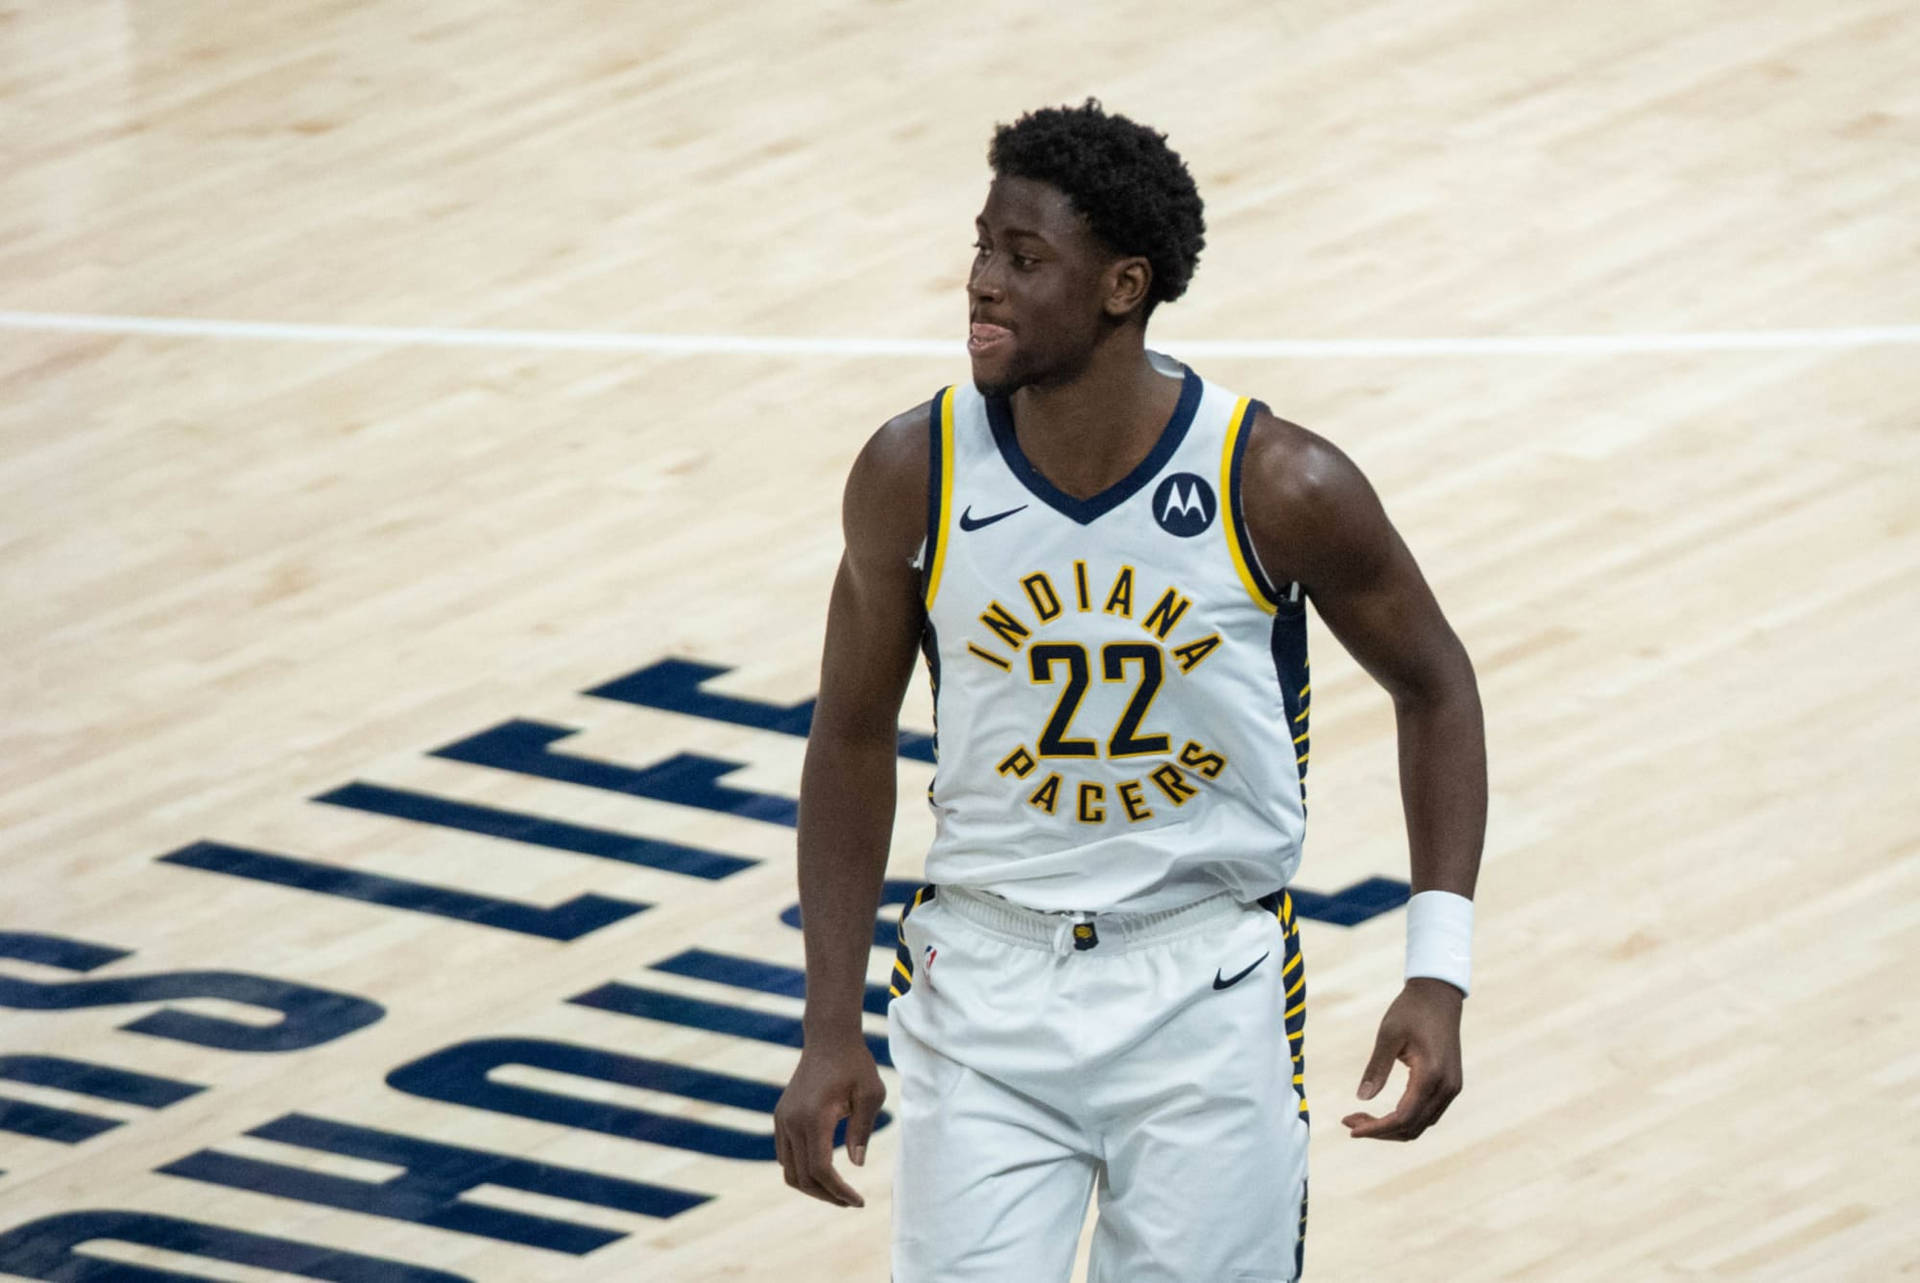 Pacers Caris Levert On Court Wallpaper